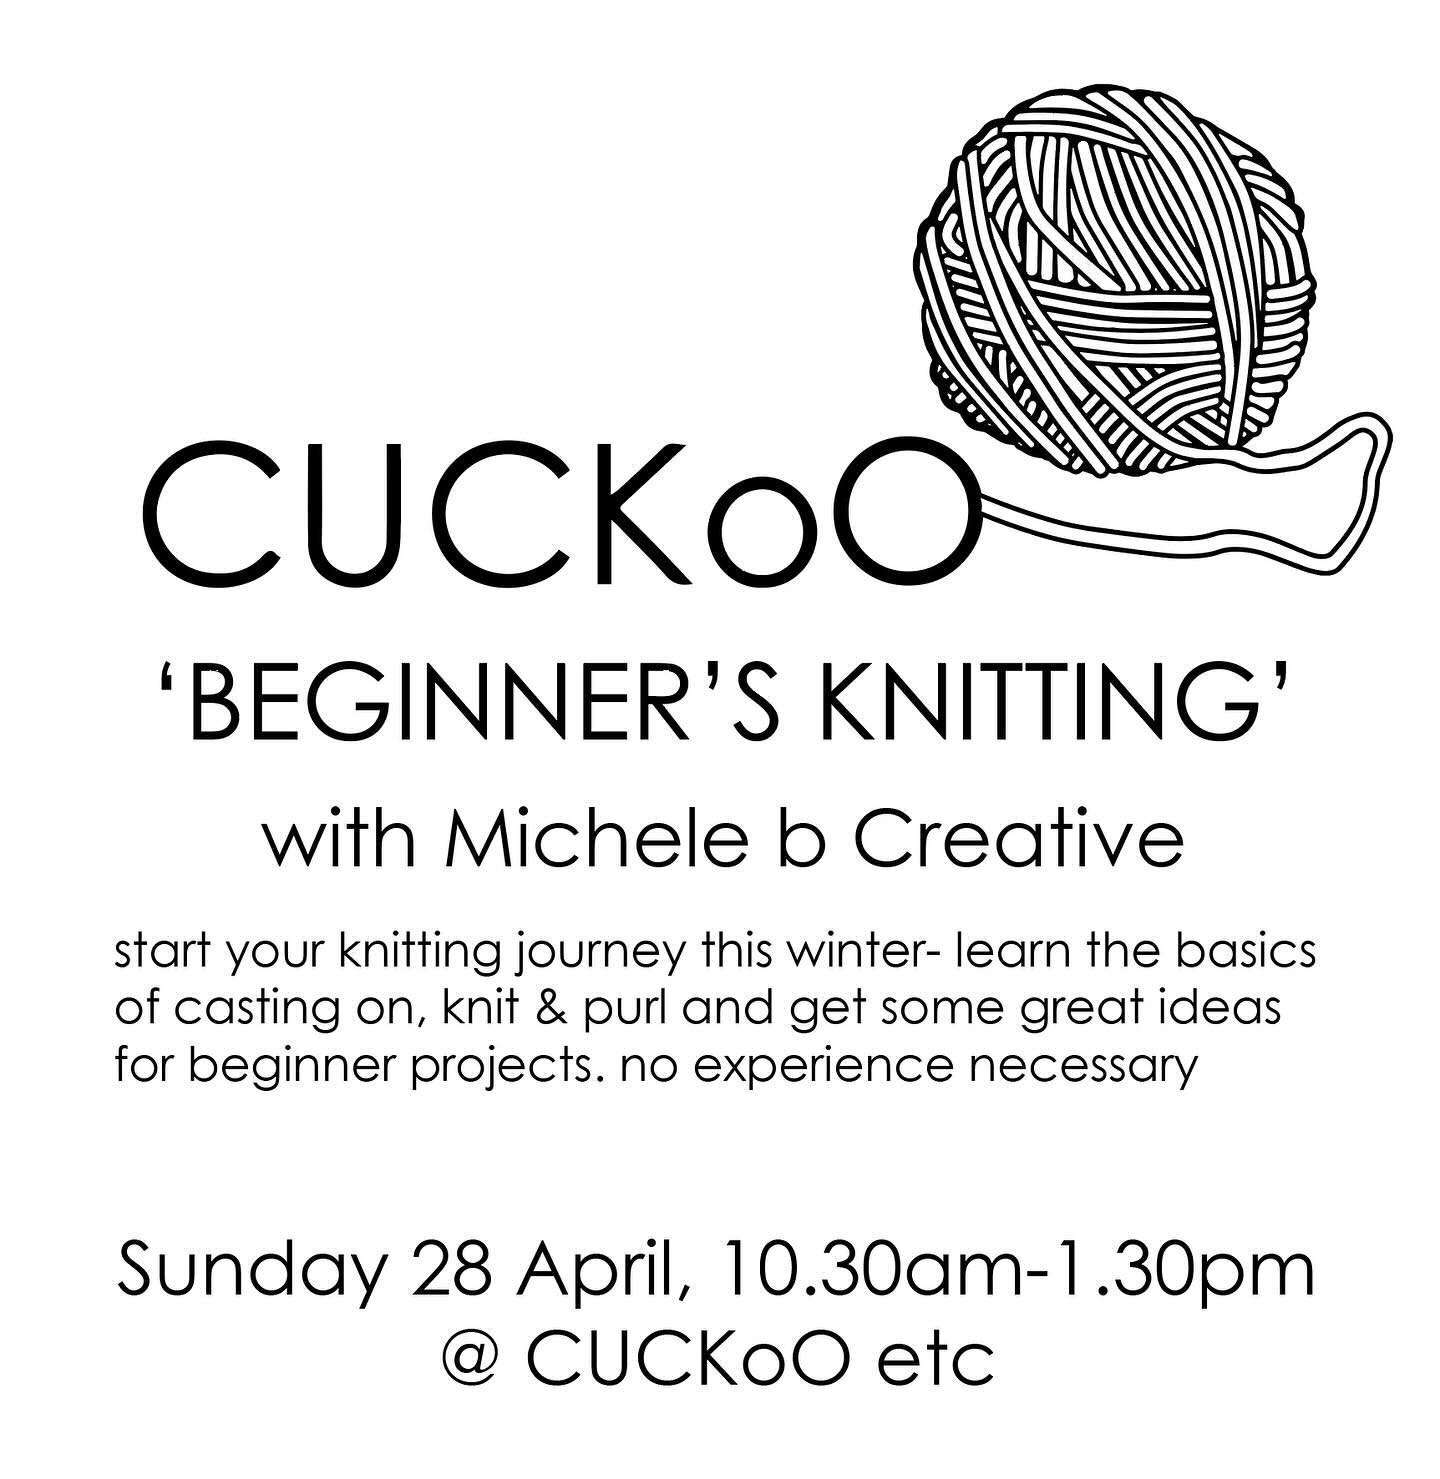 the chill is in the air, which meets knitting season approaches! our beginners knitting class is for those just beginning their journey- Michele will teach you how to cast on, knit, purl &amp; cast off! colourwork is for those wishing to expand their